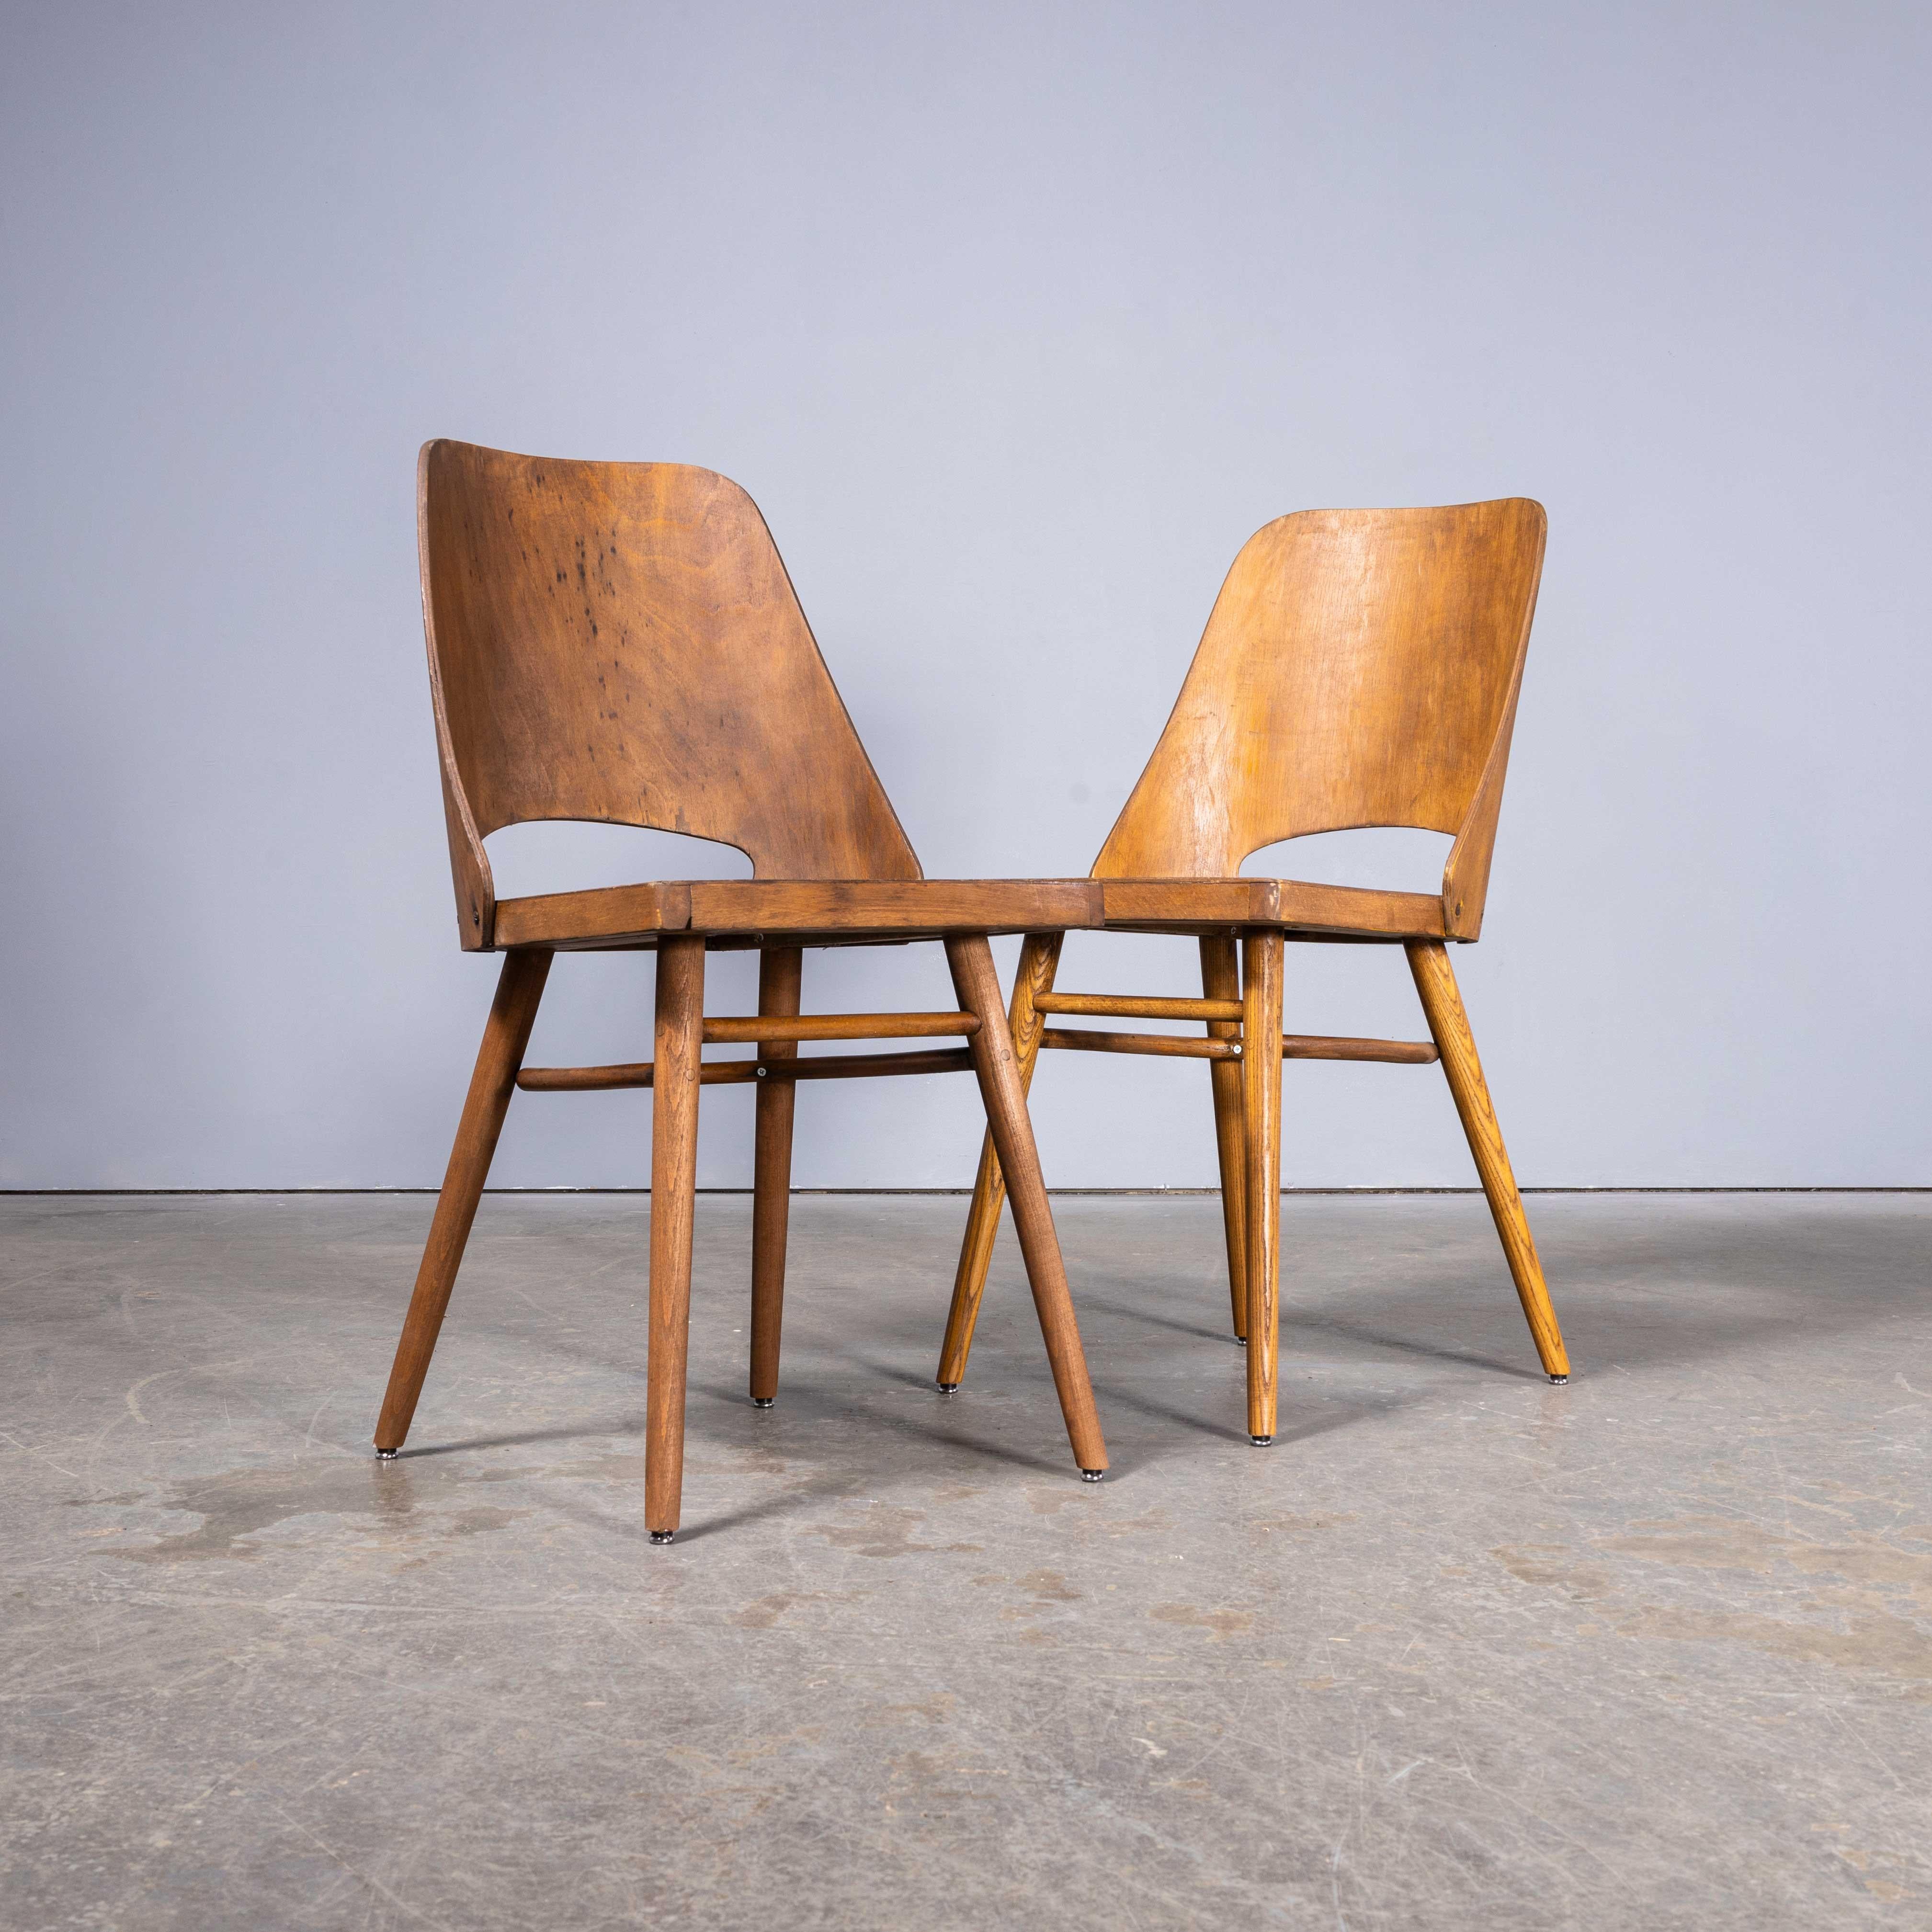 1950’s Mid Oak Dining Chairs By Radomir Hoffman For Ton – Pair For Sale 5